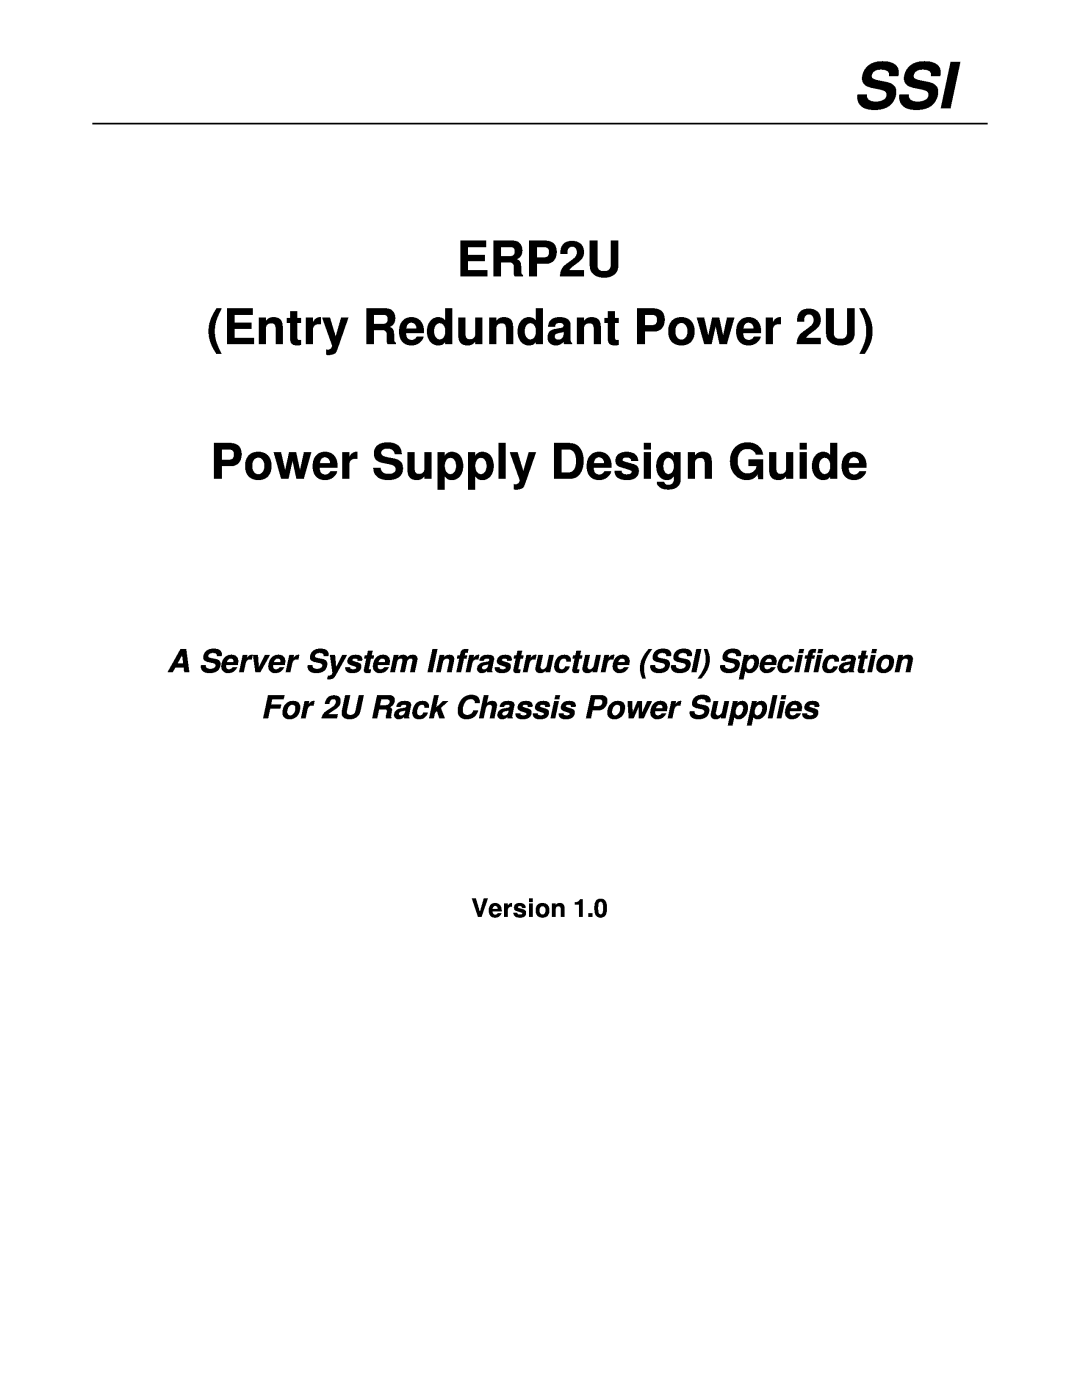 Intel manual ERP2U Entry Redundant Power 2U Power Supply Design Guide, A Server System Infrastructure SSI Specification 